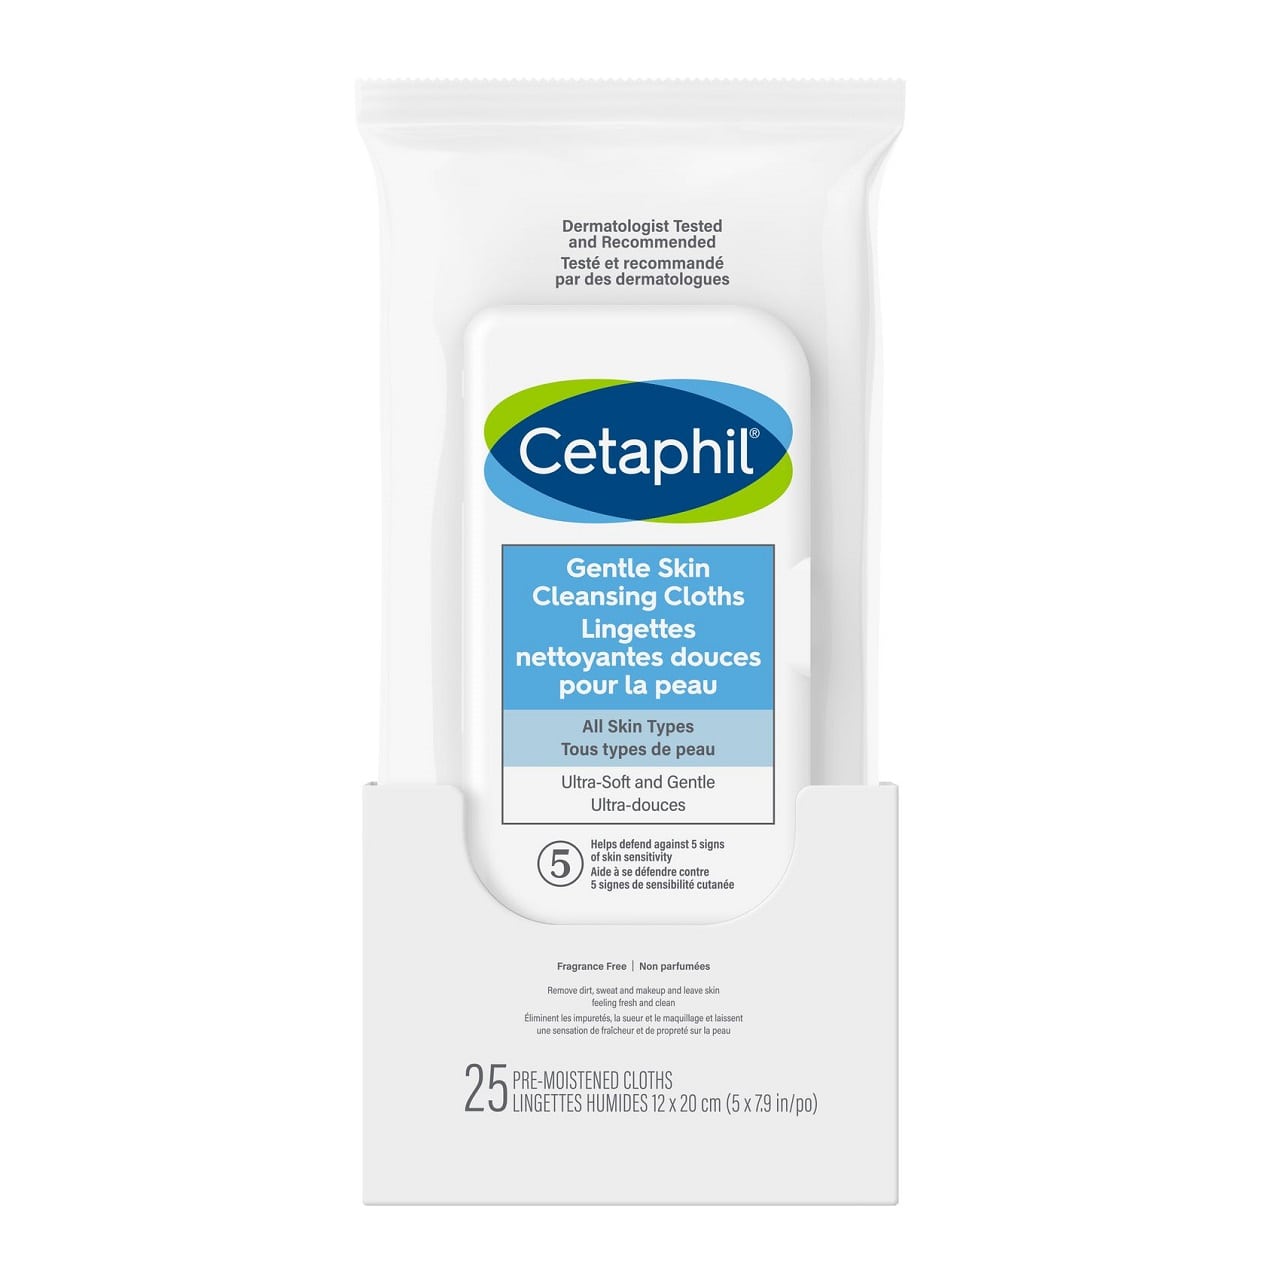 Product label for Cetaphil Gentle Skin Cleansing Cloths (25 count)